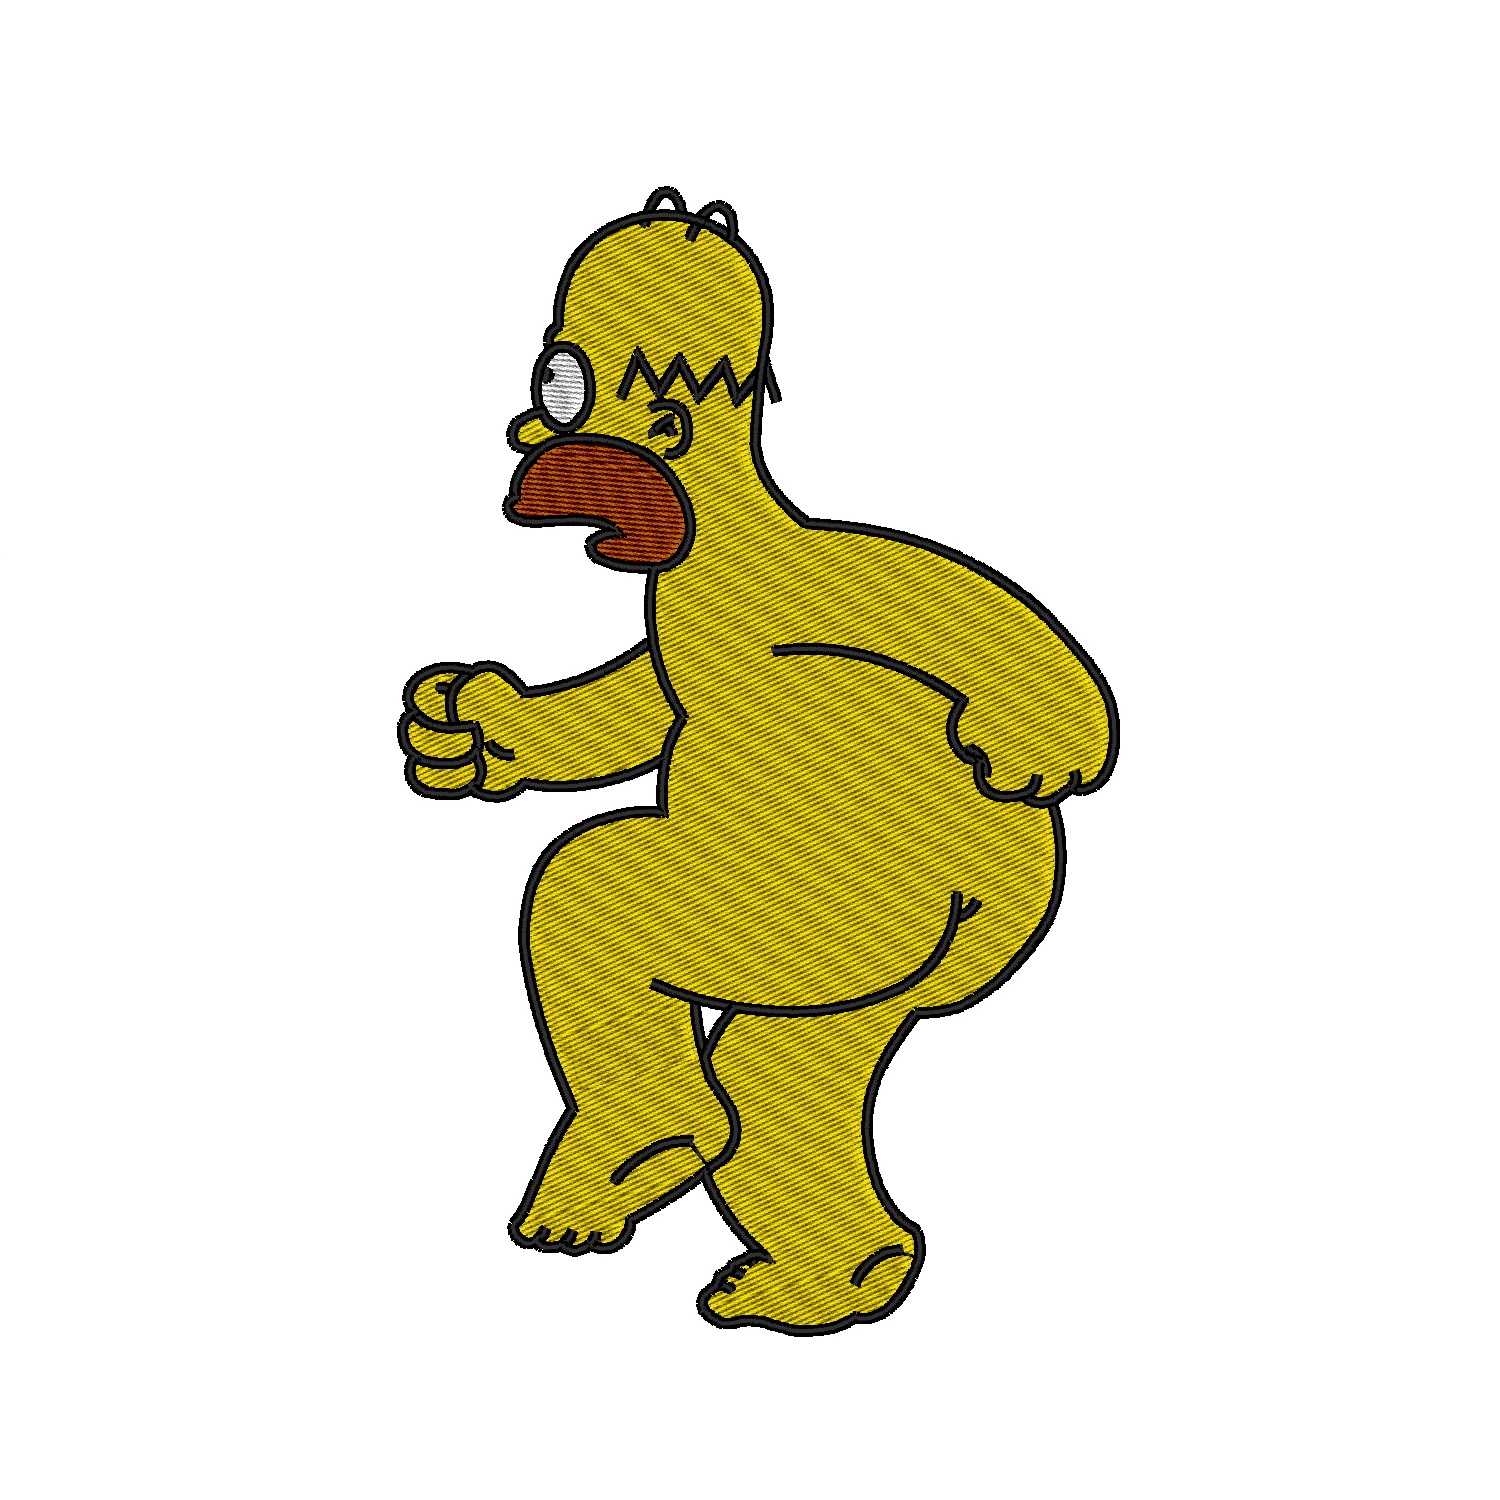 arthur ferreira recommends homer simpson naked pic